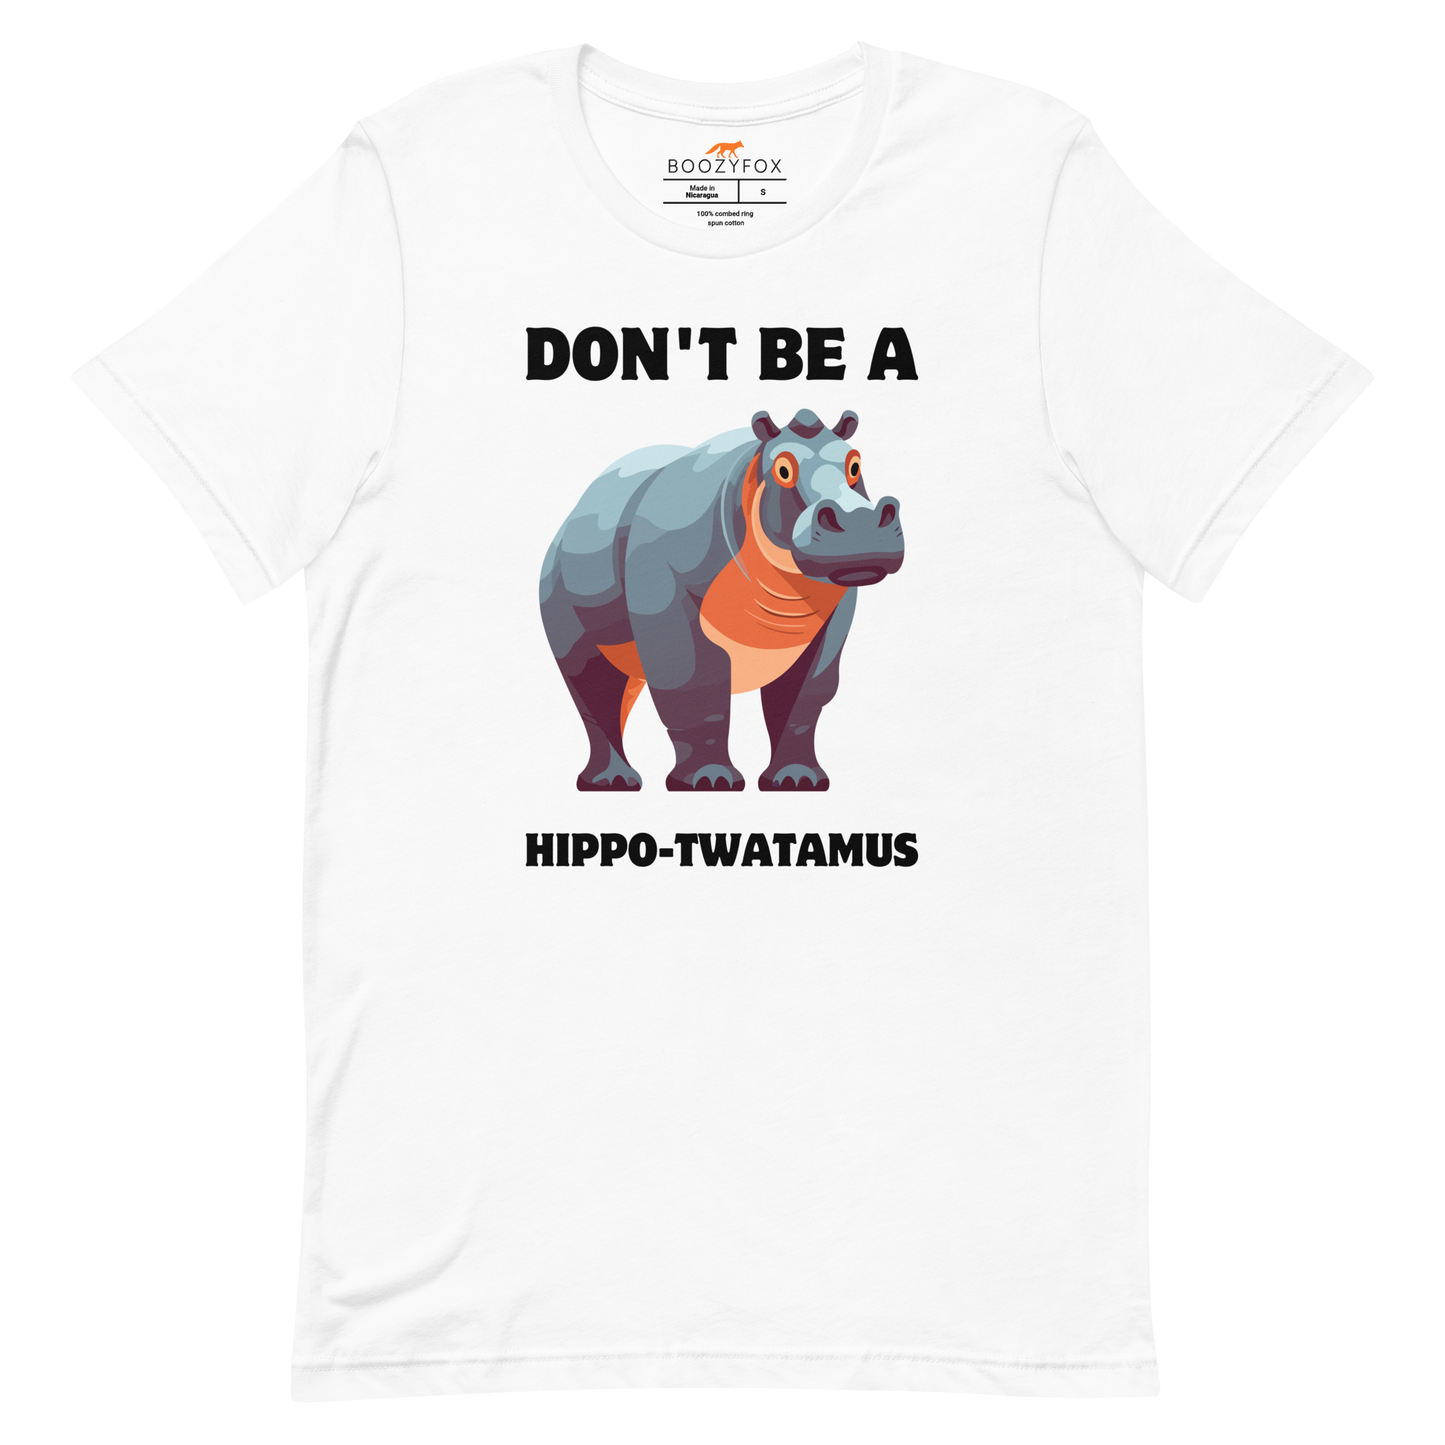 White Premium Hippo Tee featuring a Don't Be a Hippo-Twatamus graphic on the chest - Funny Graphic Hippo Tees - Boozy Fox